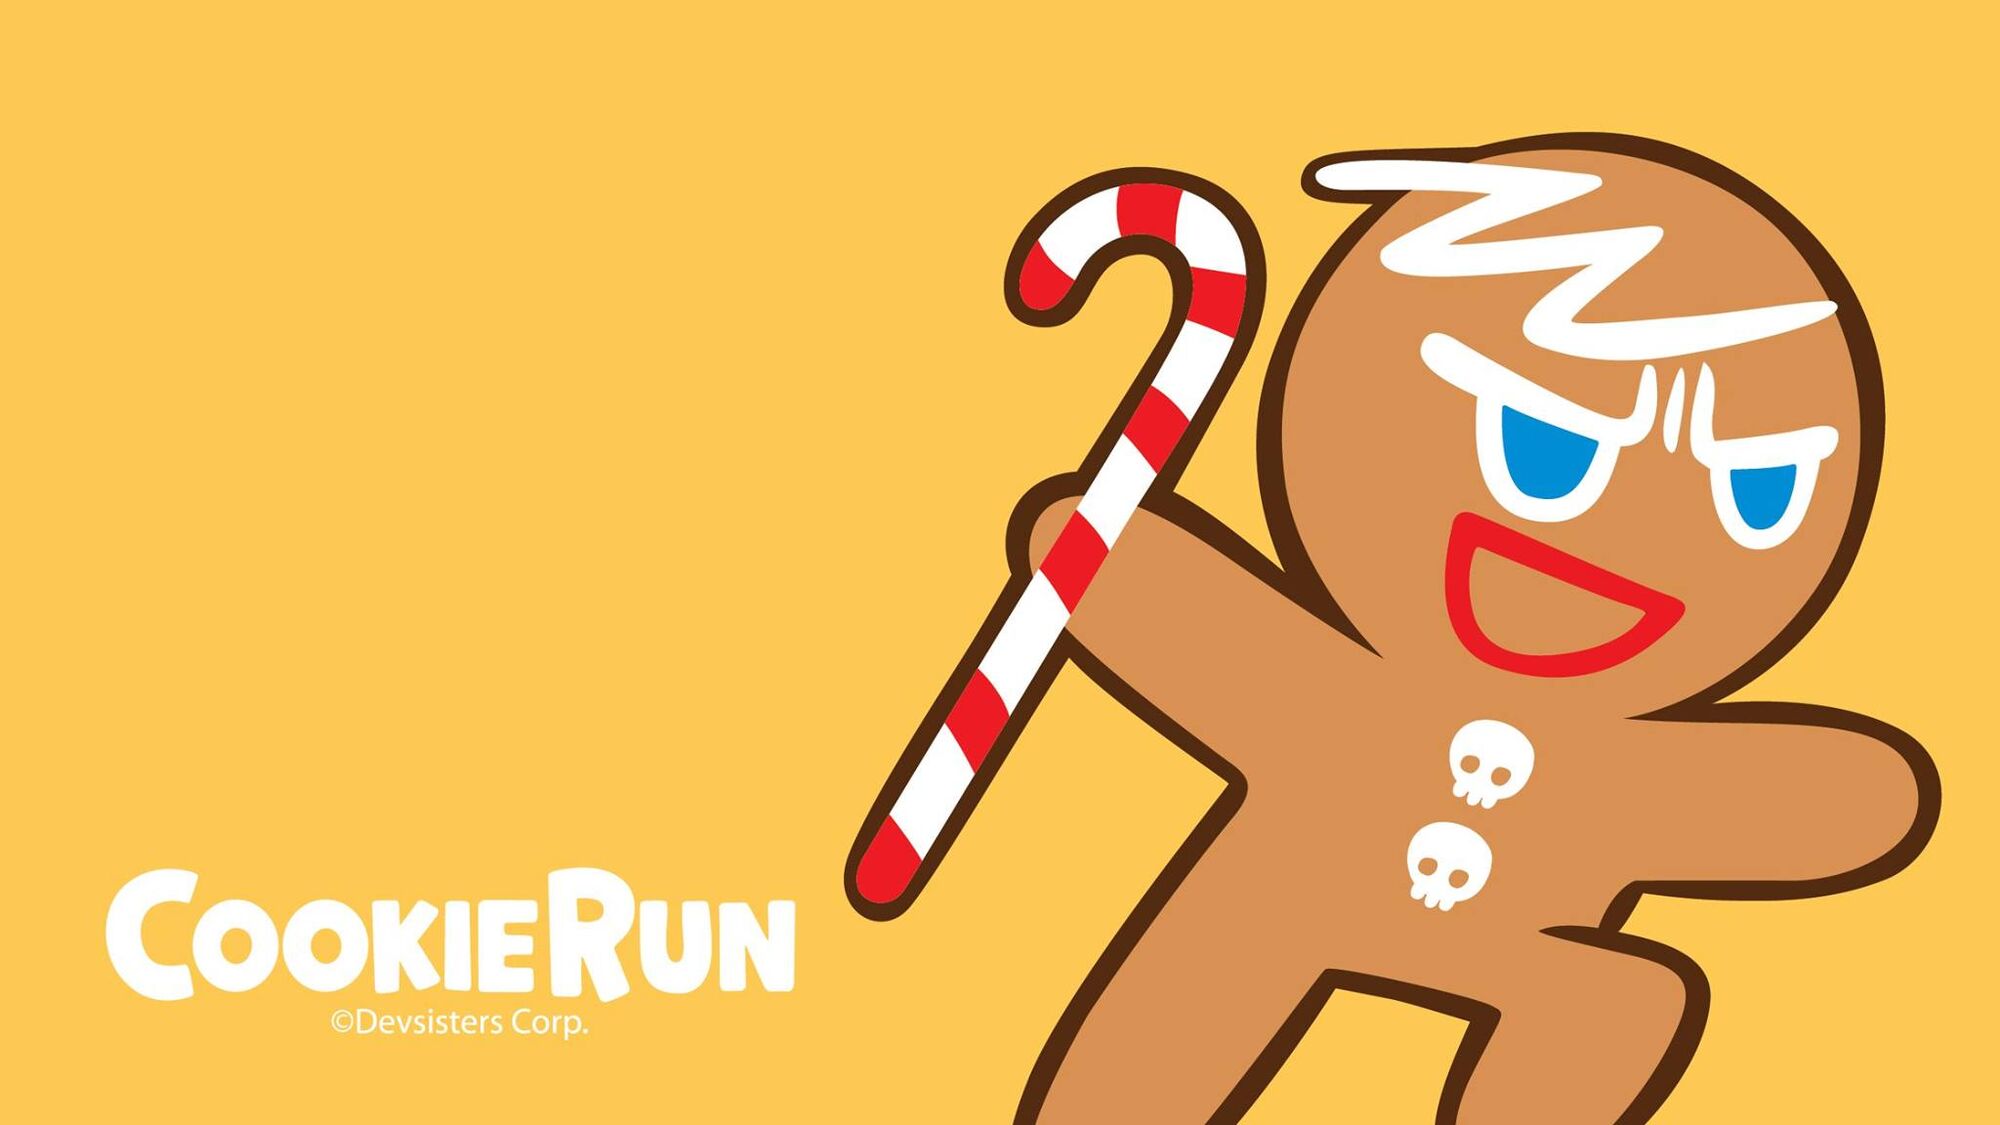 Wallpapers Of Cookie Run : How About Some Delicious Cookie Run Ovenbreak Facebook